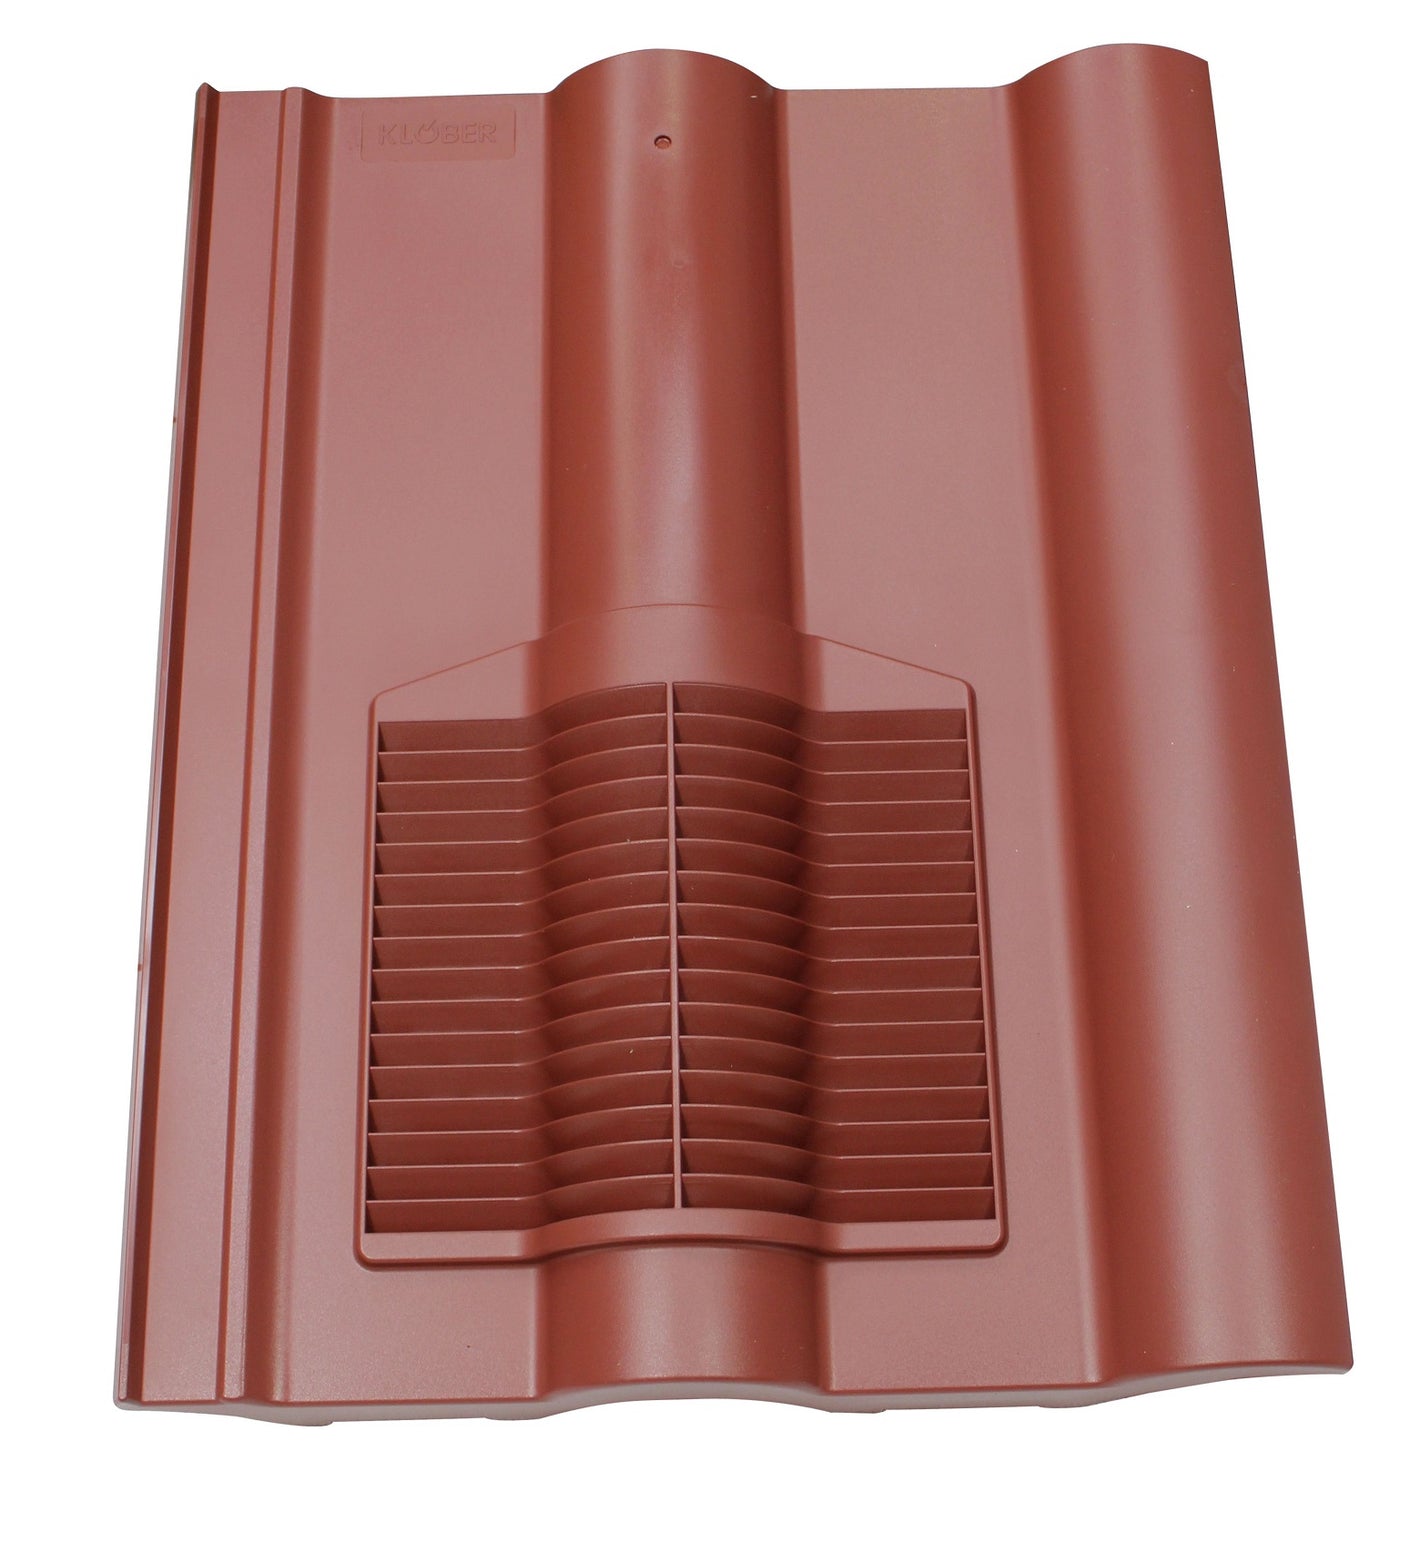 Marley Double Roman Tile Vent - Dark Red